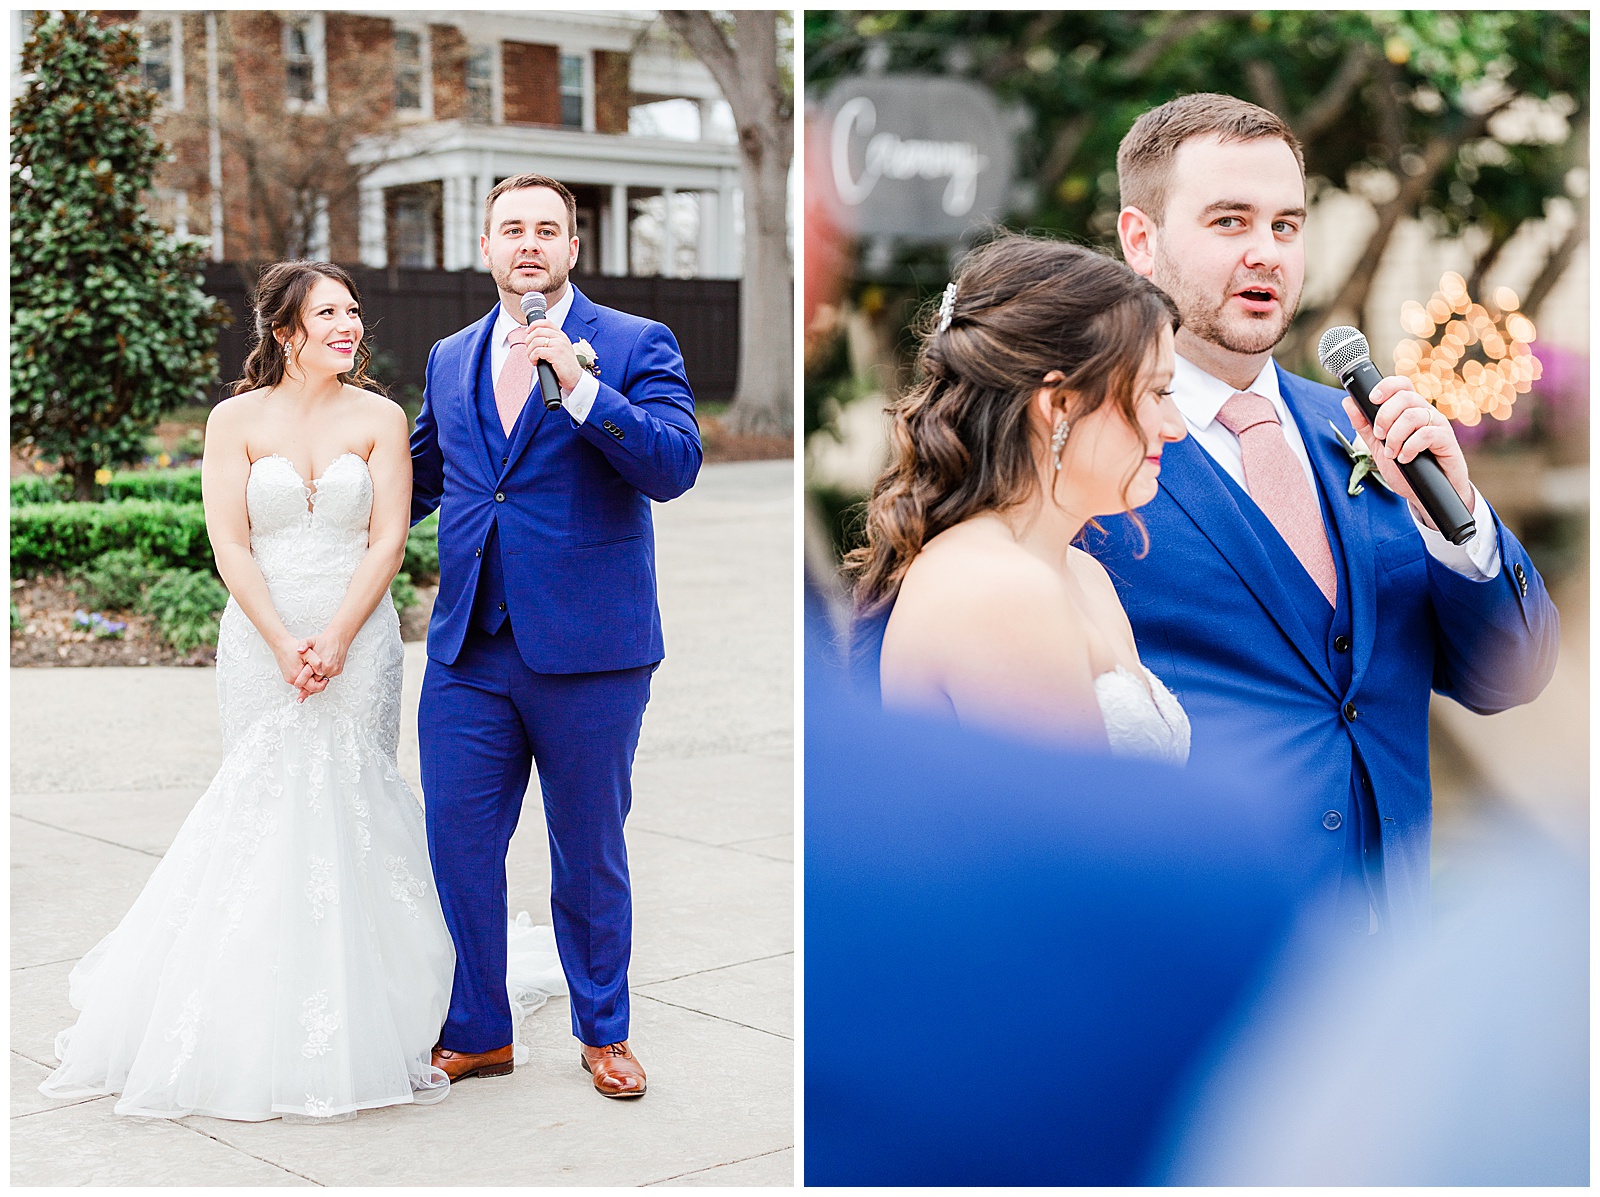 Adorable Bride and Groom at Wedding Reception from Light and Airy Outdoor Wedding at Separk Mansion in Gastonia, NC | Kevyn Dixon Photography